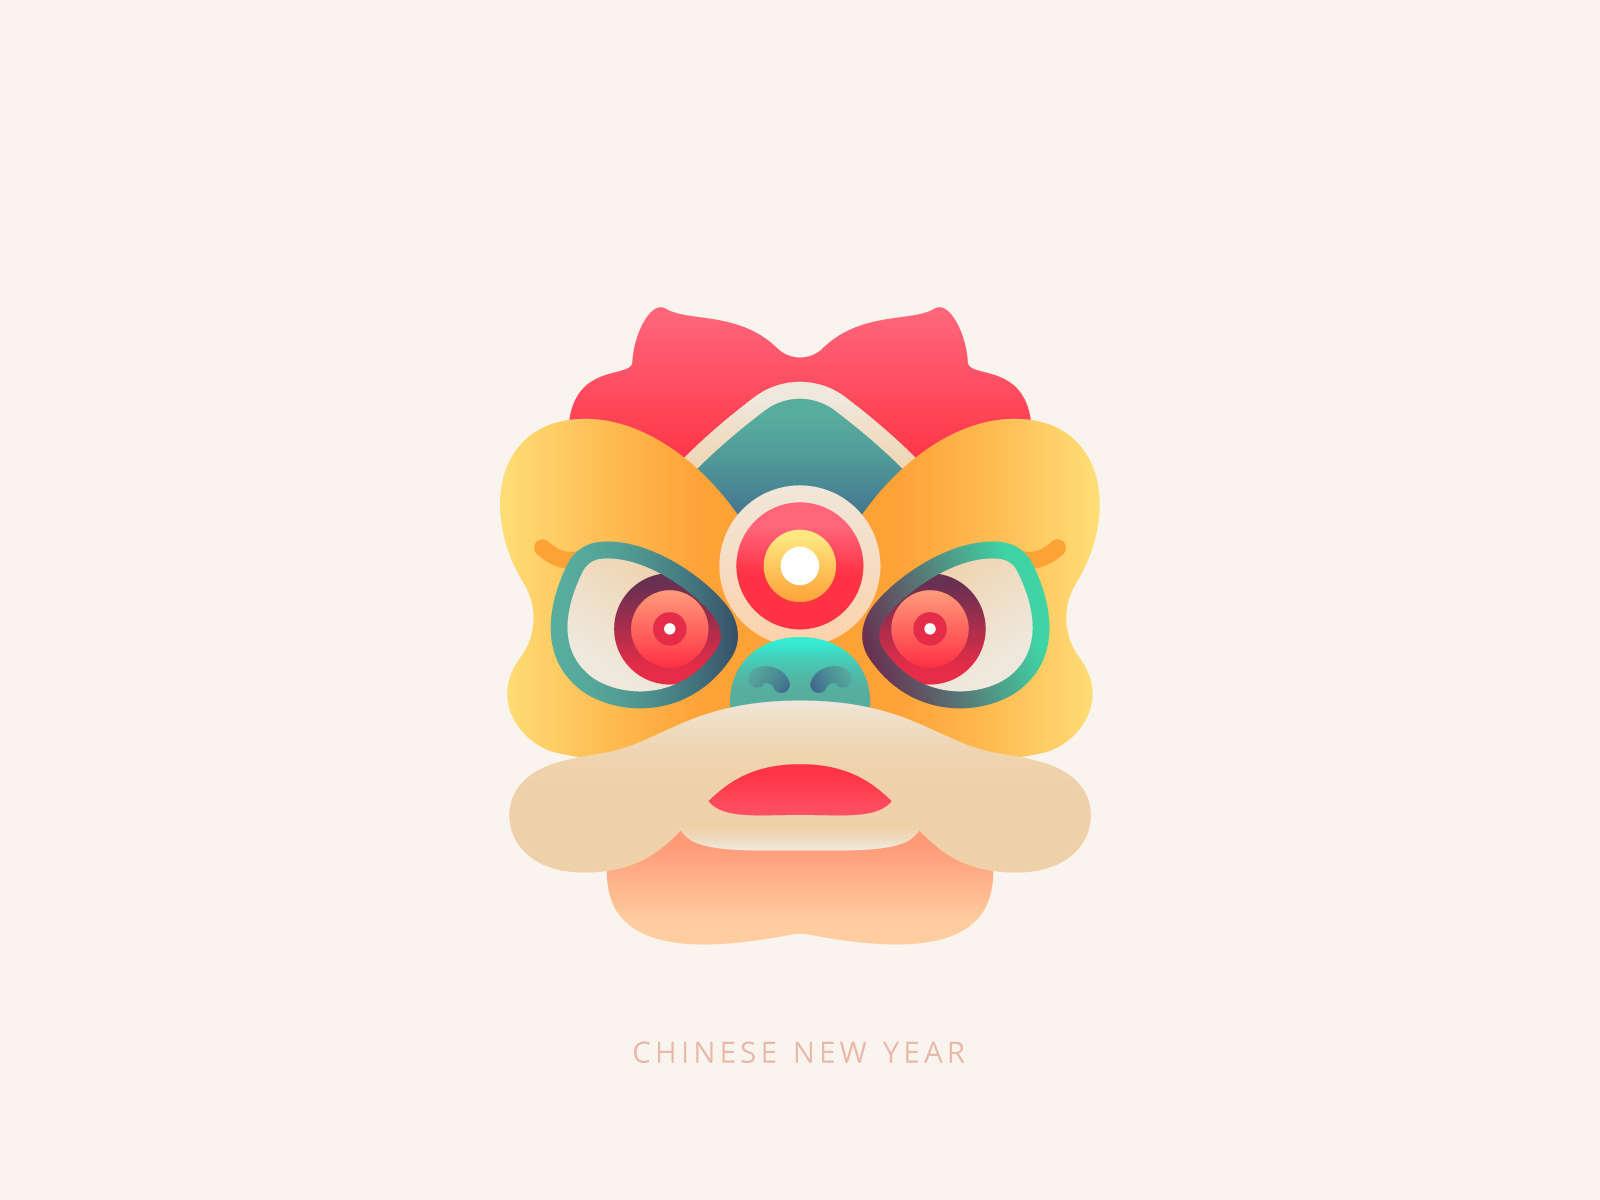 SMITE on Twitter Today complete a FWOTD to unlock the Lunar New Year  Avatar in celebration of the Chinese New Year httpstcocn1213Lt6n  httpstco8tF3PjeW11  Twitter